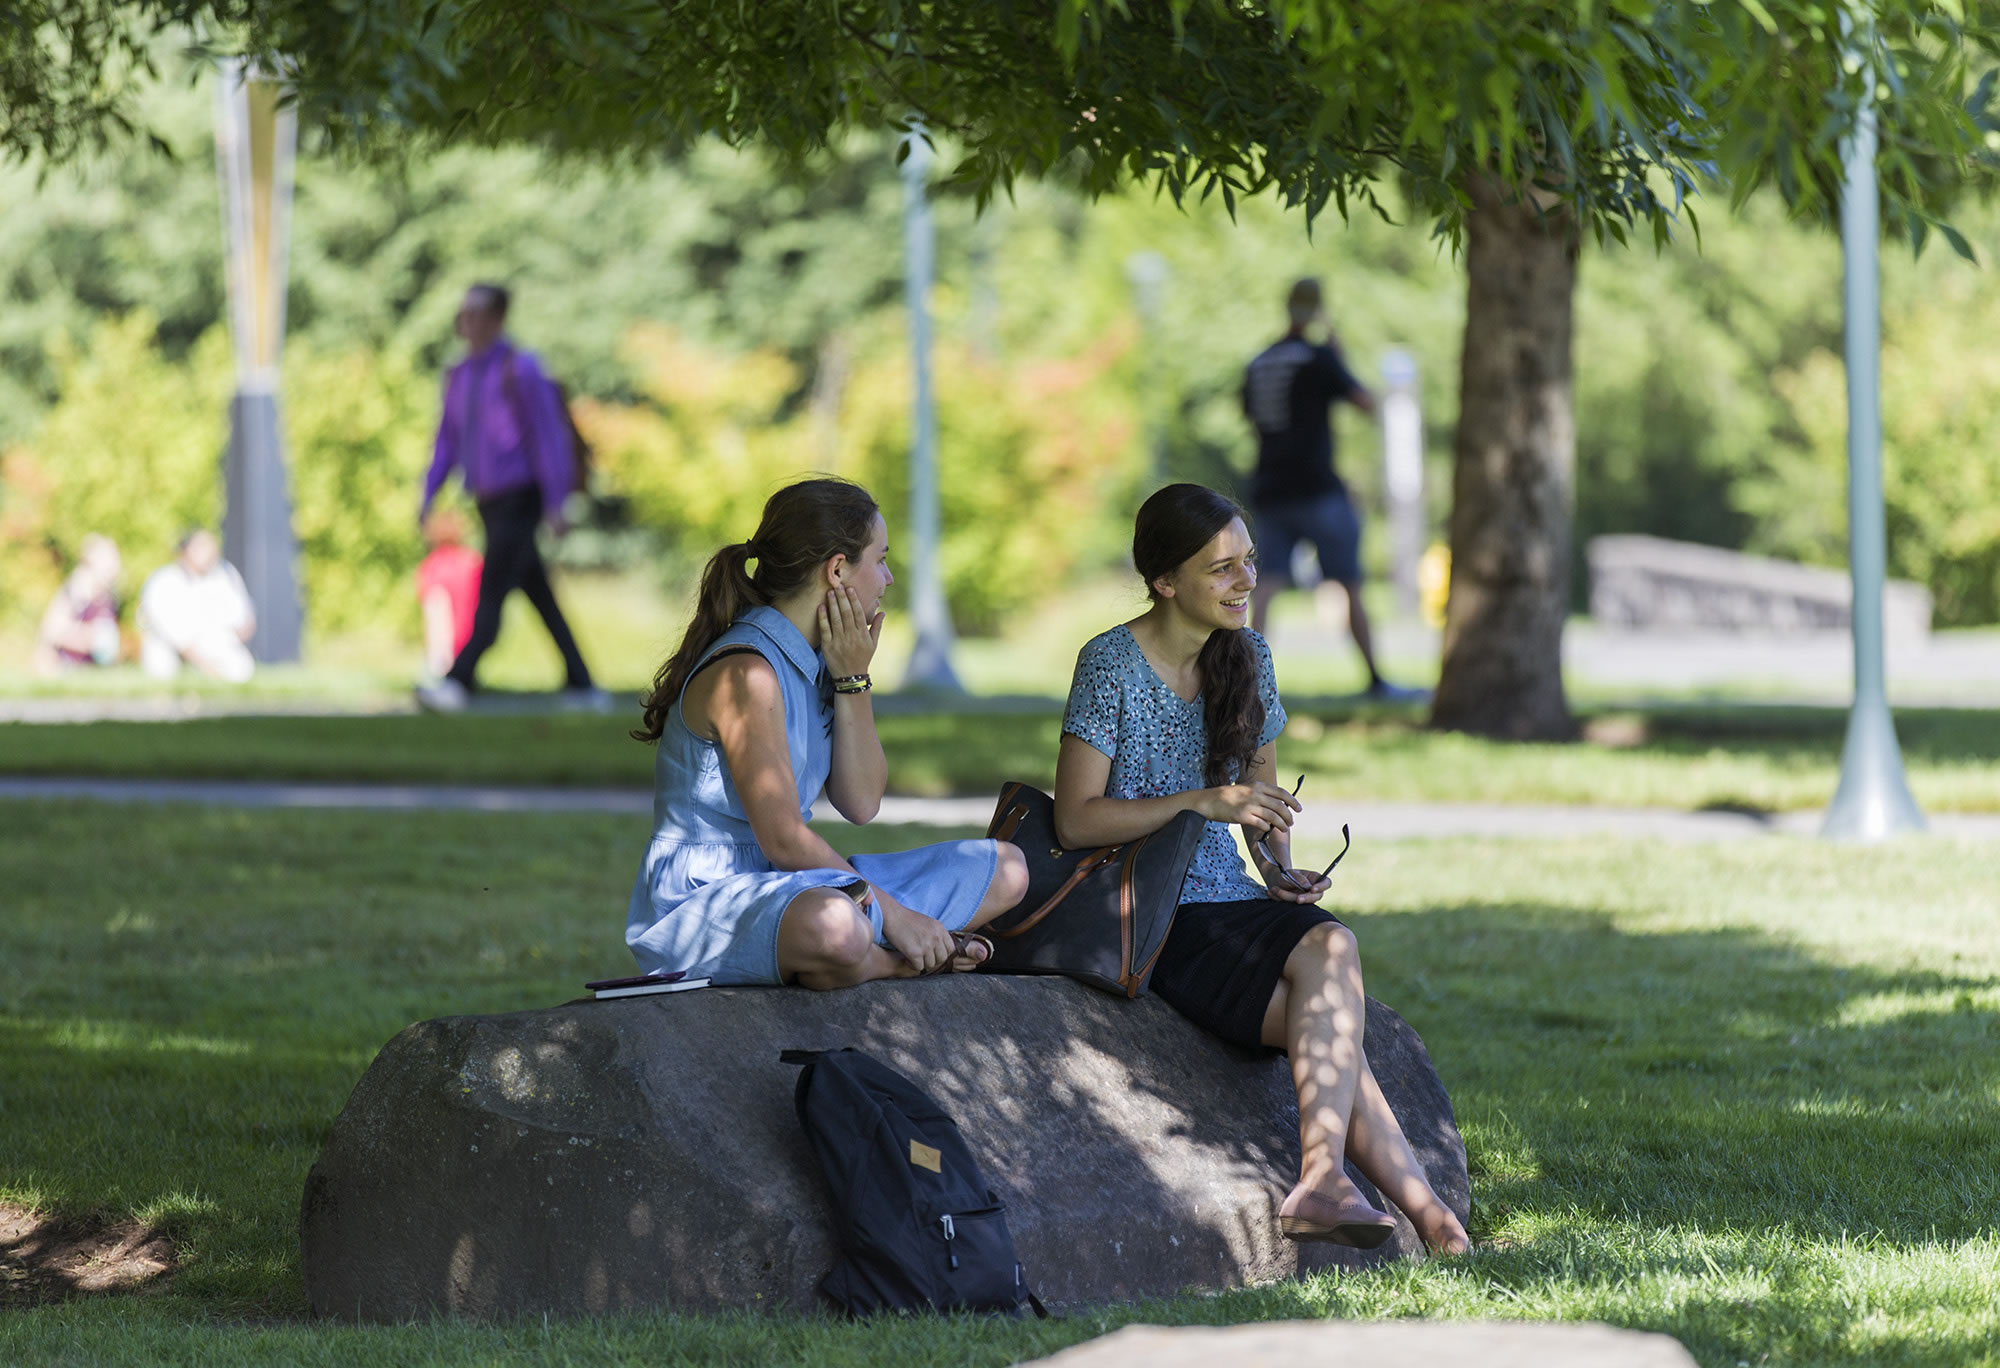 Vicki Tolmacheva, 21, left, and Olga Boligar, 18, both seniors from Vancouver, chat in the shade on the WSU Vancouver campus the first week of school.